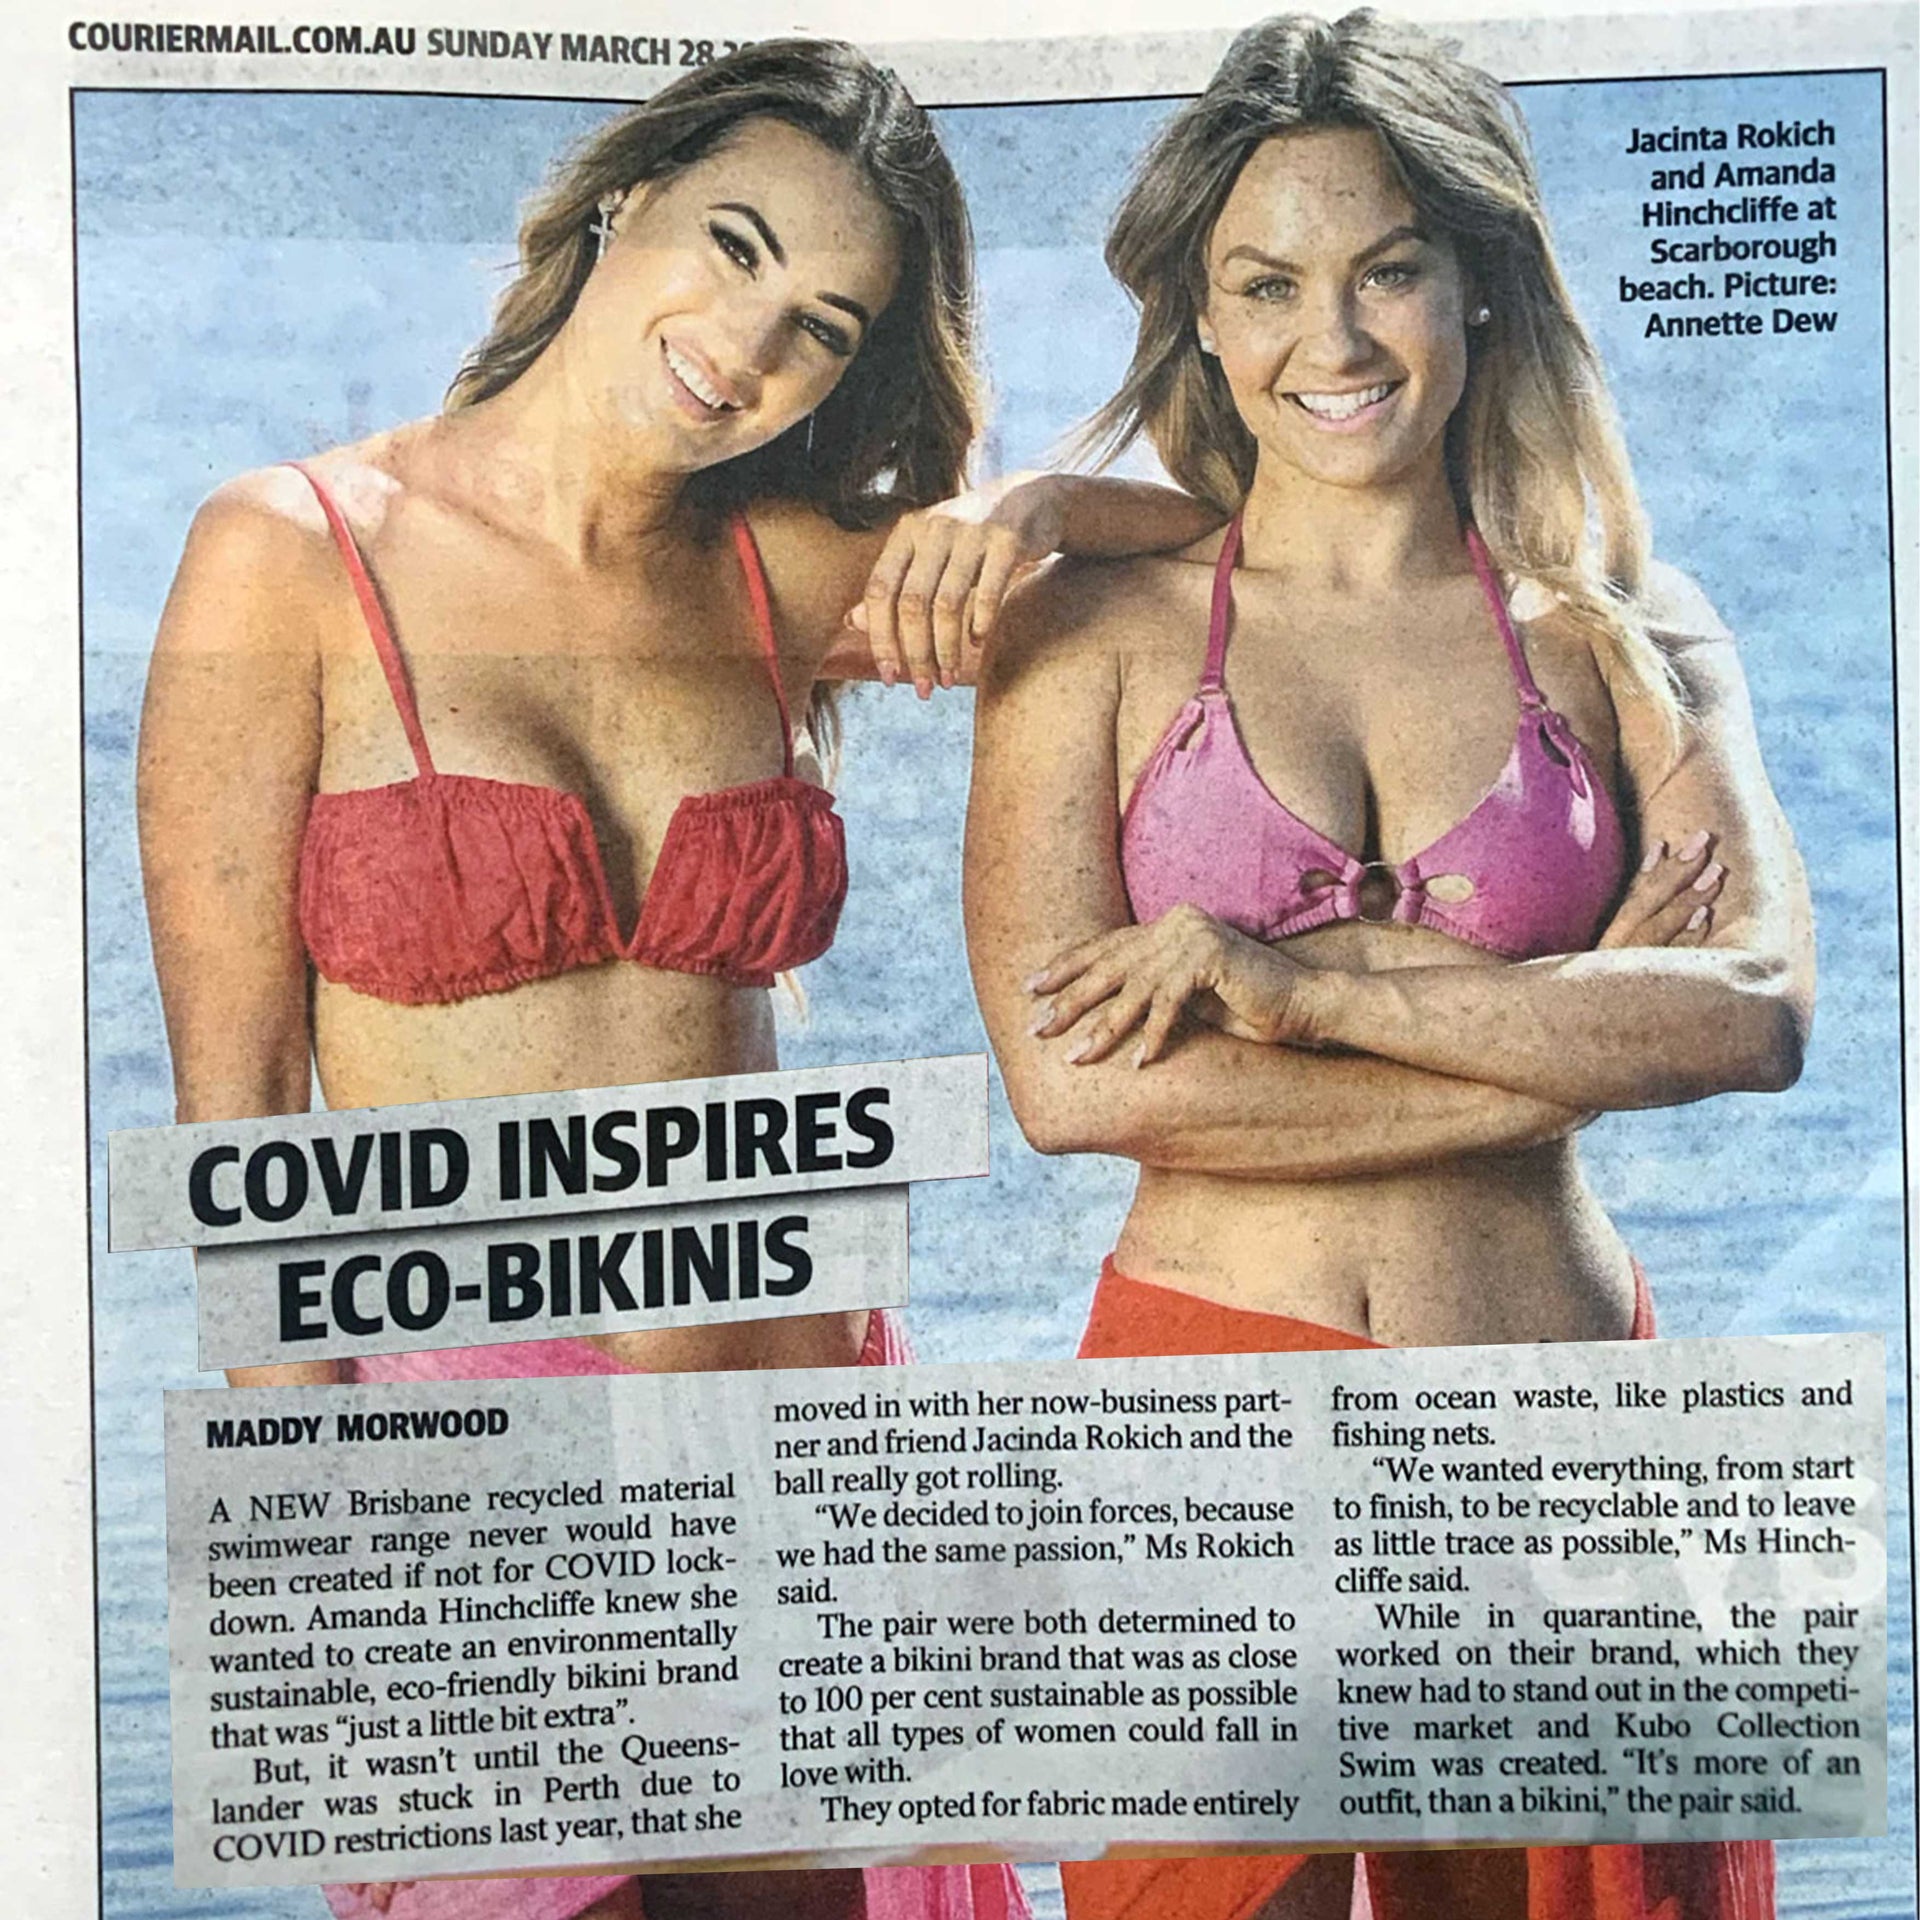 KOBU Launches During Covid Lockdown - As seen in Courier Mail